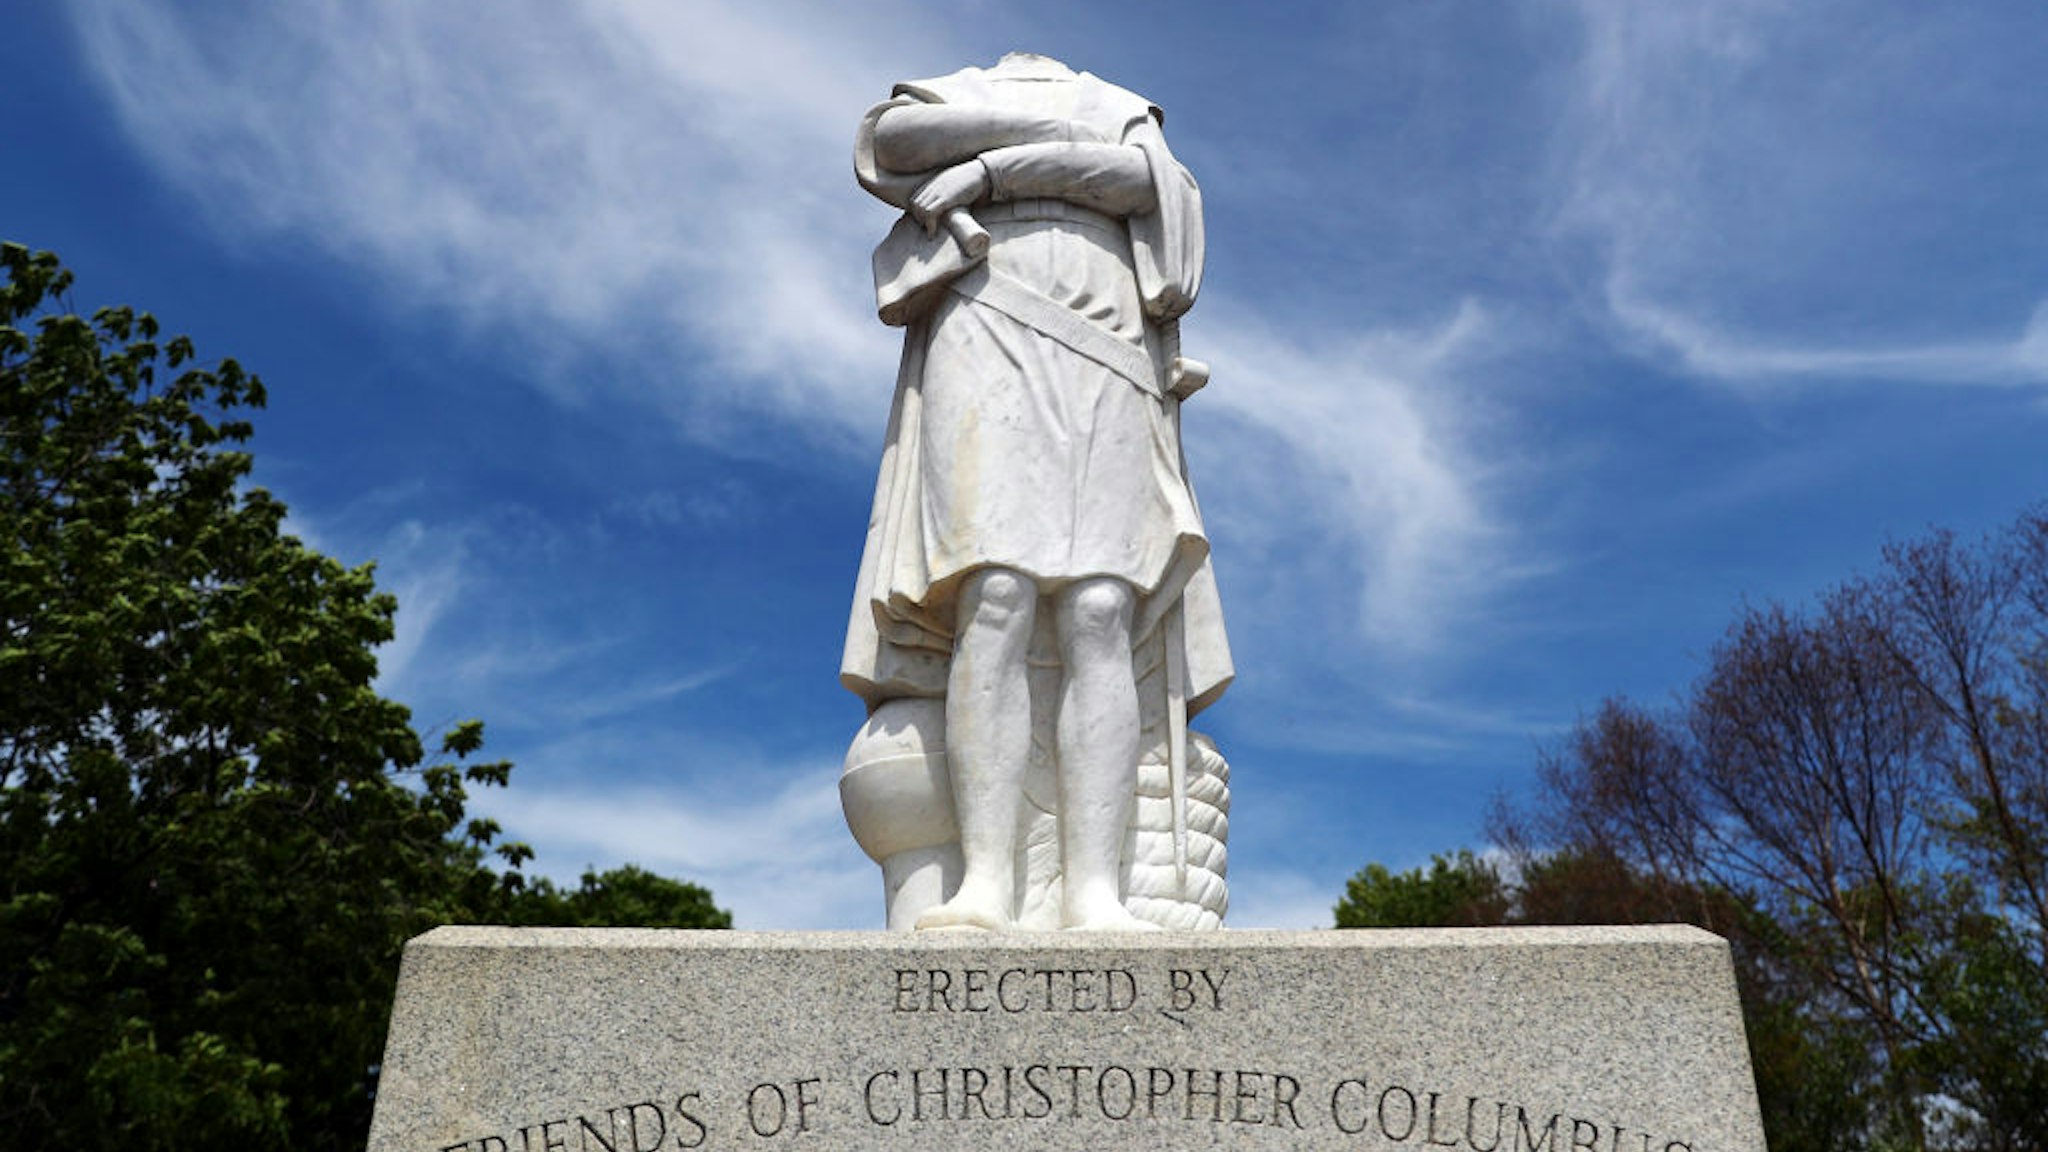 A statue depicting Christopher Columbus is seen with its head removed at Christopher Columbus Waterfront Park on June 10, 2020 in Boston, Massachusetts.